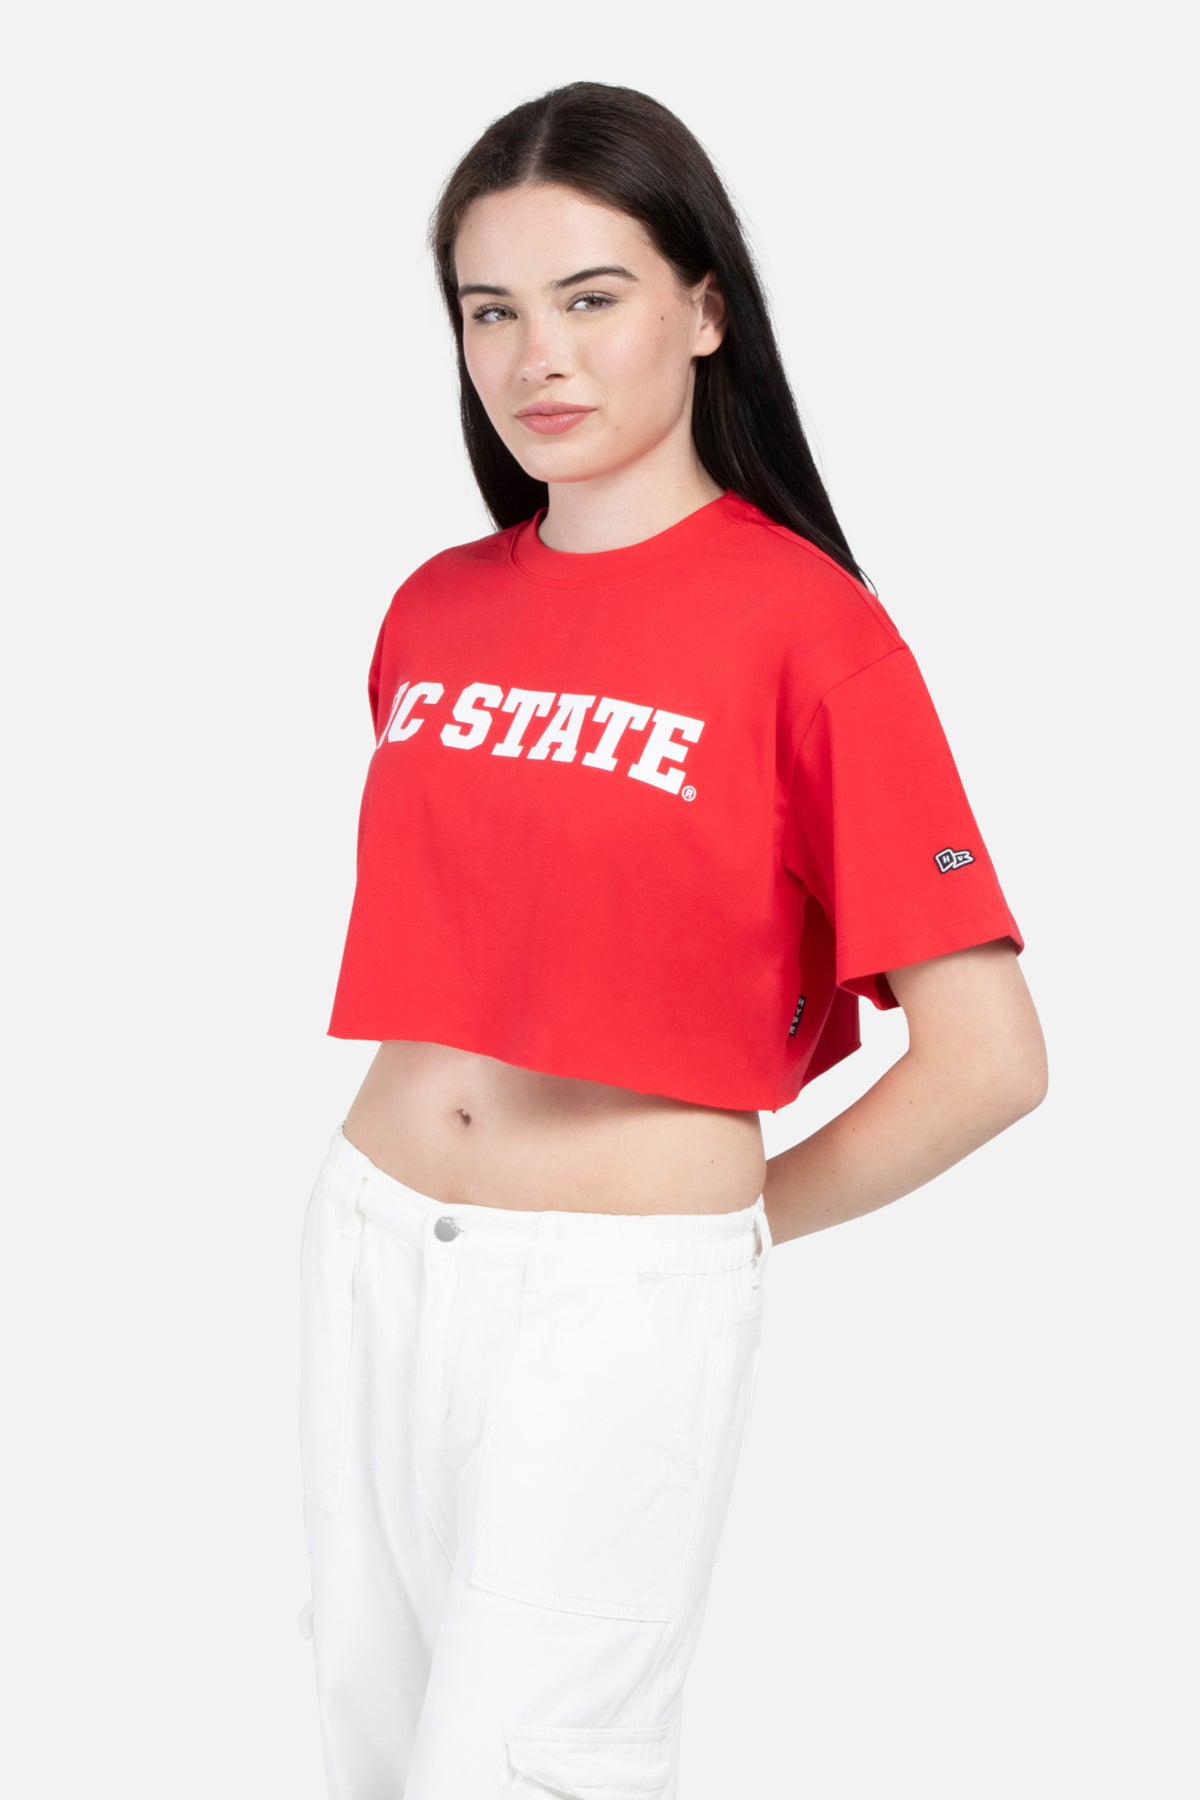 NC State Track Top